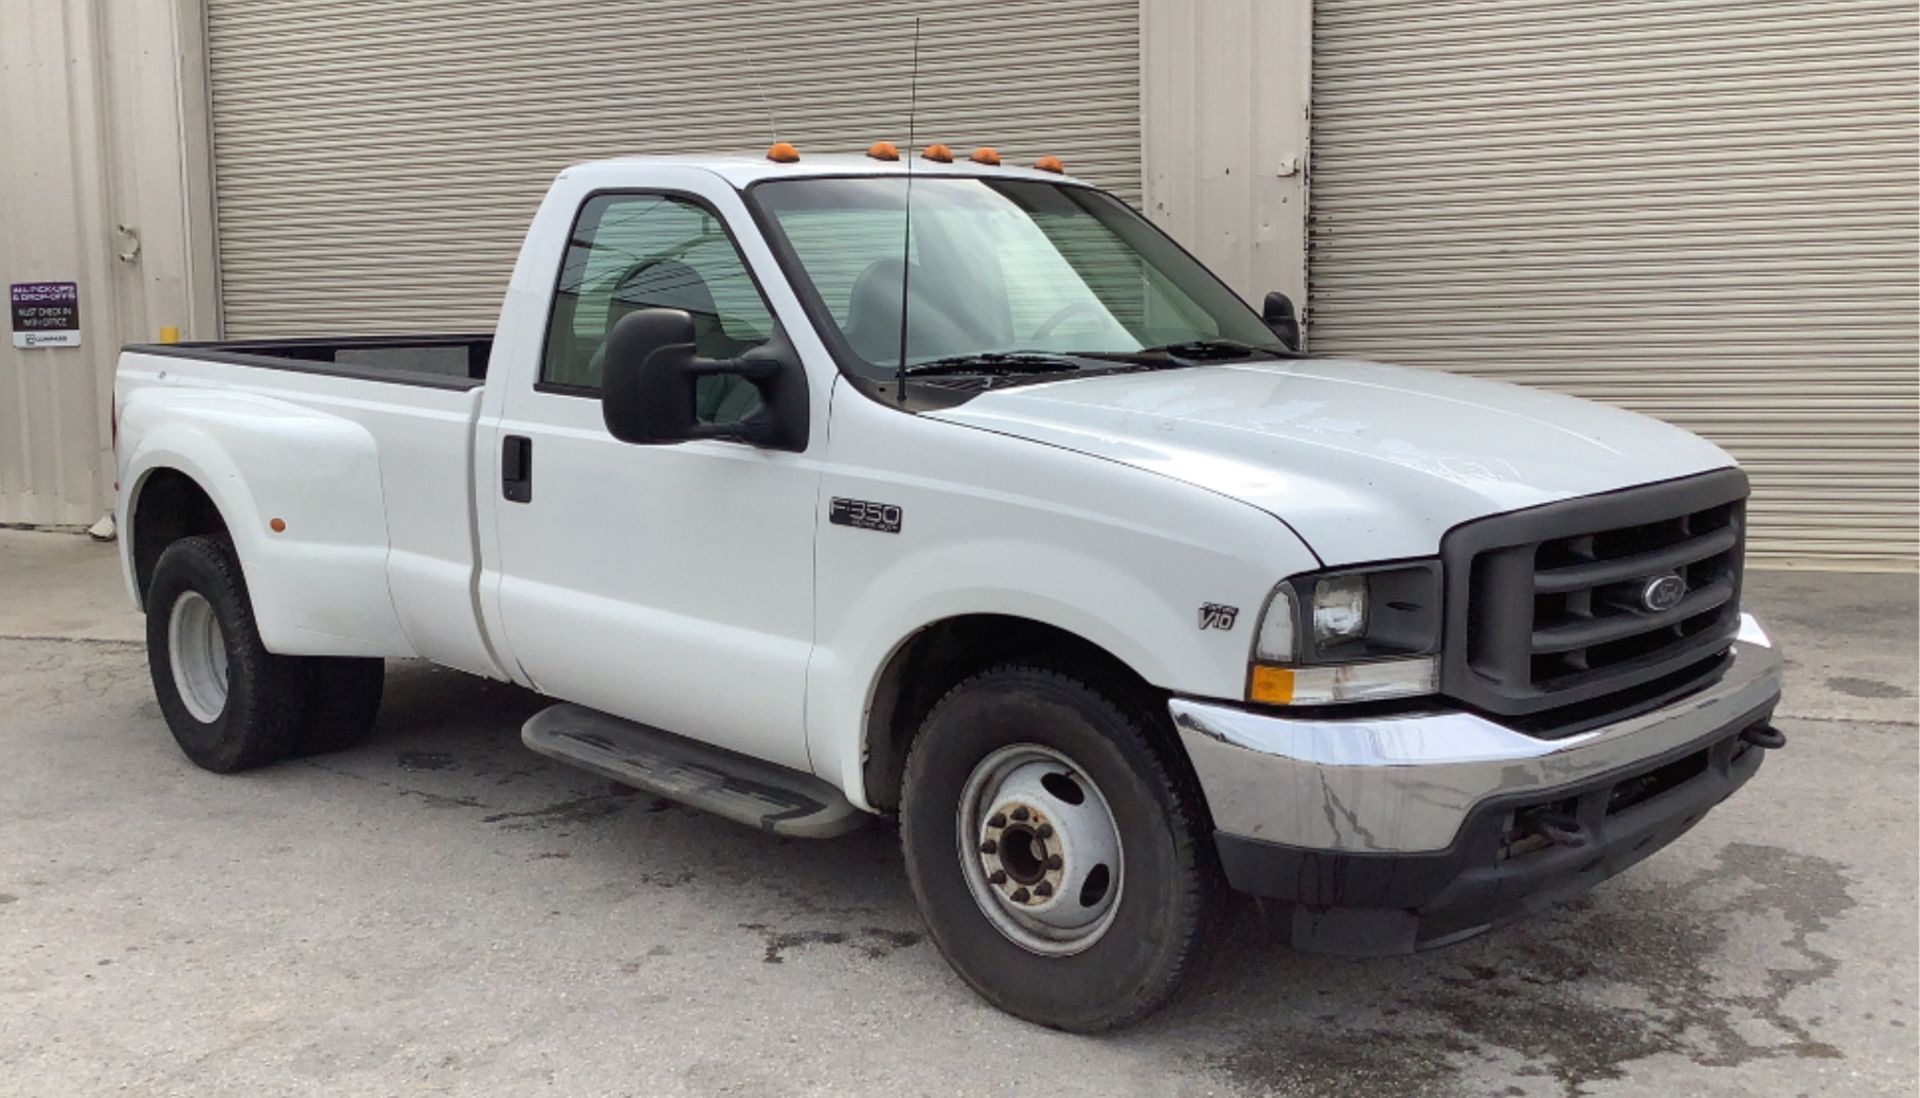 2002 Ford F-350 Regular Cab Dually 2WD - Image 2 of 89